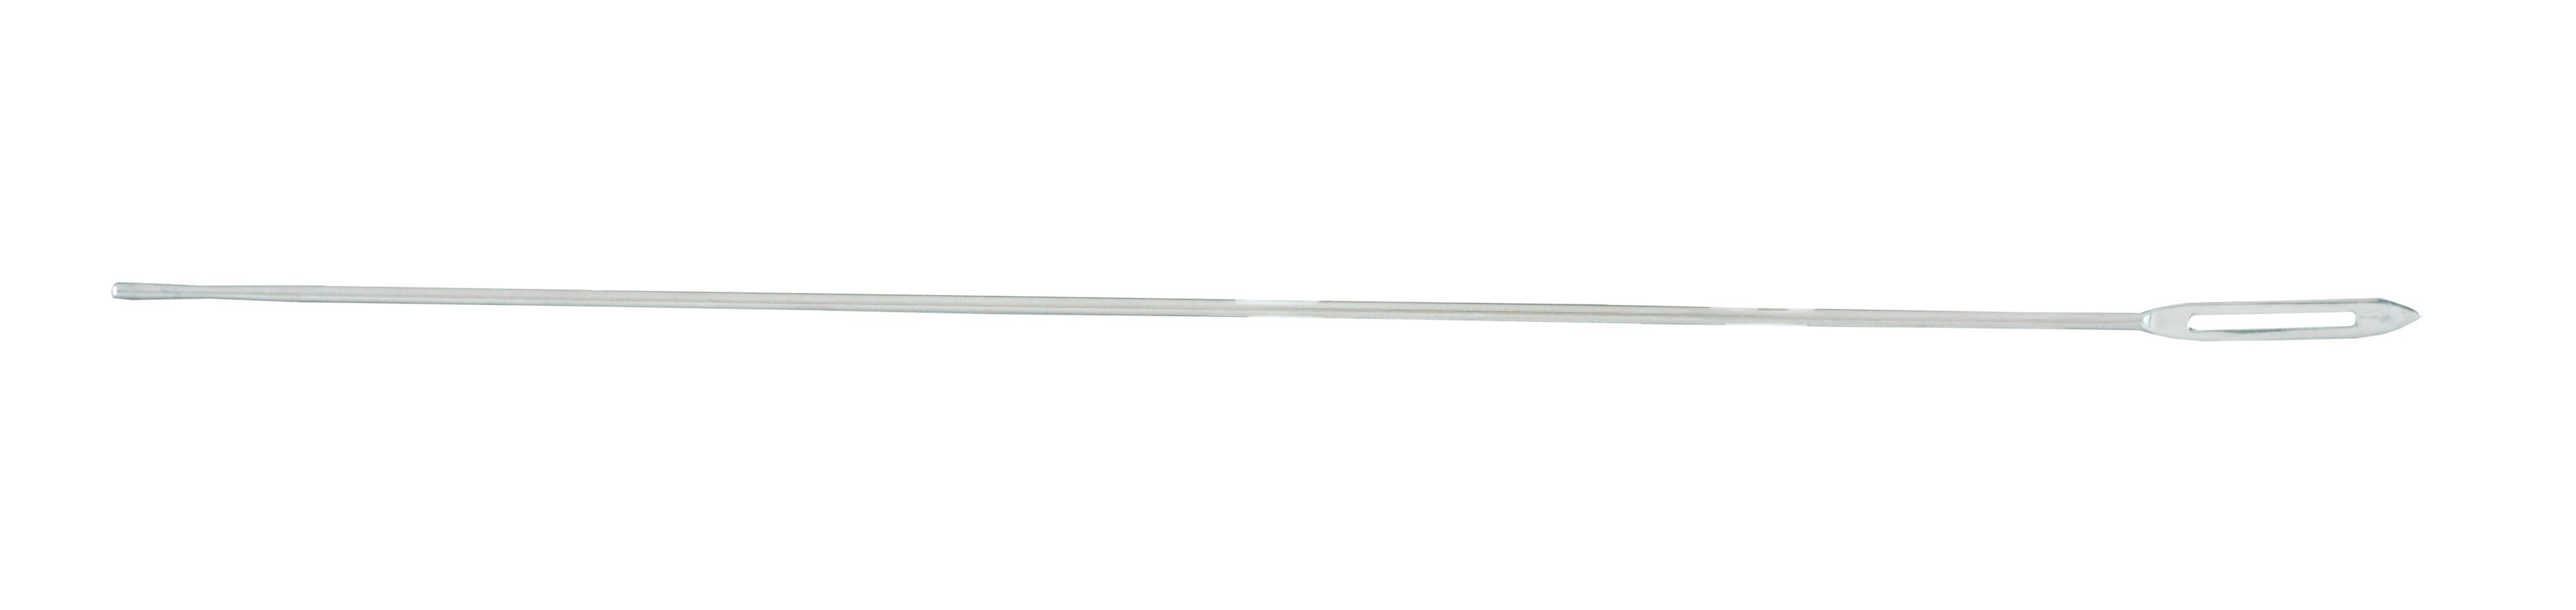 miltex-probes-with-eye-malleable-10-254-cm-stainless-10-34-ss-miltex.jpg